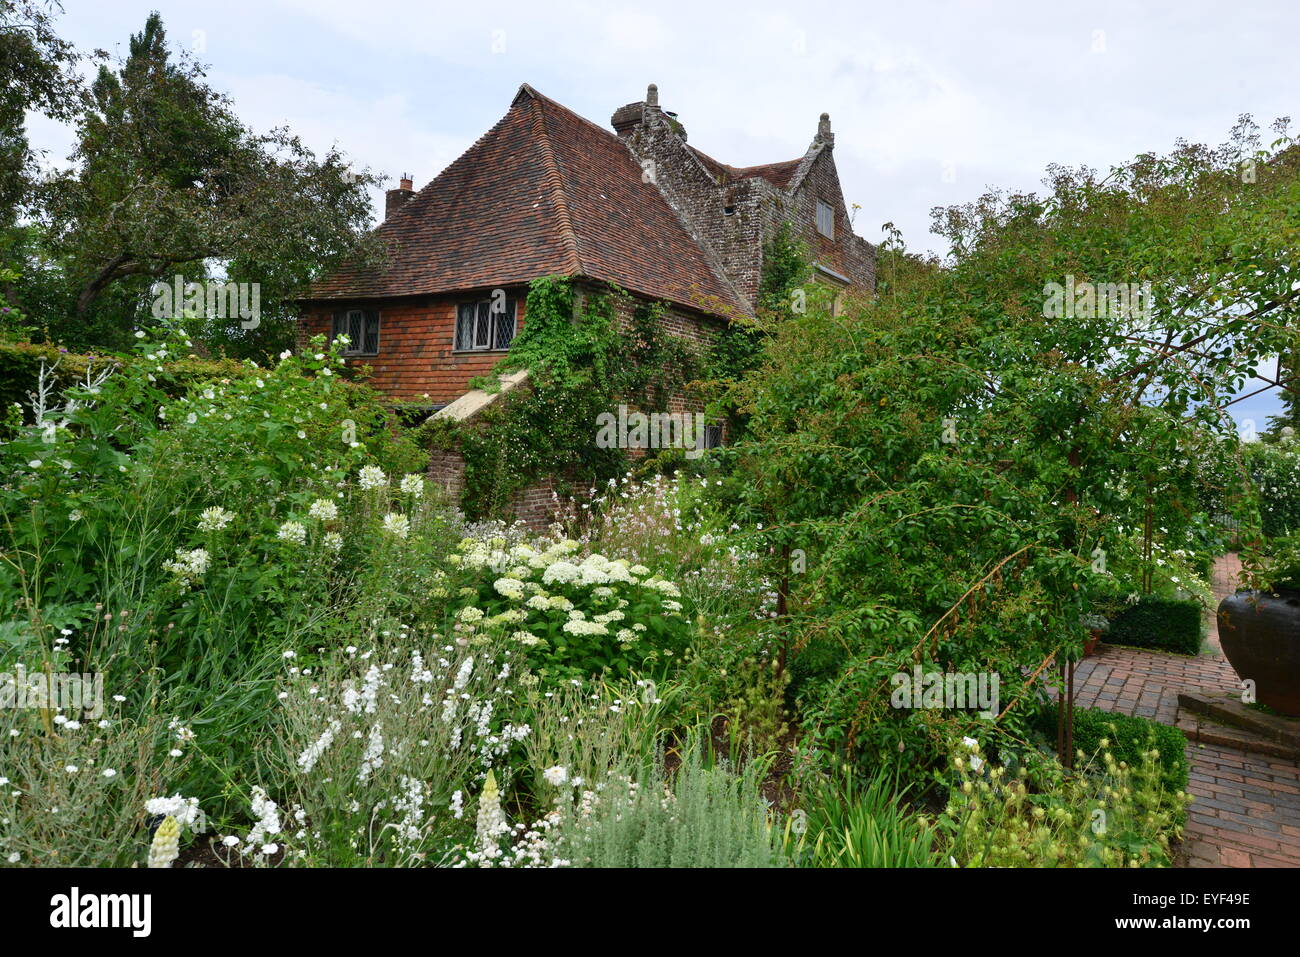 A well stocked overgrown garden in England Stock Photo